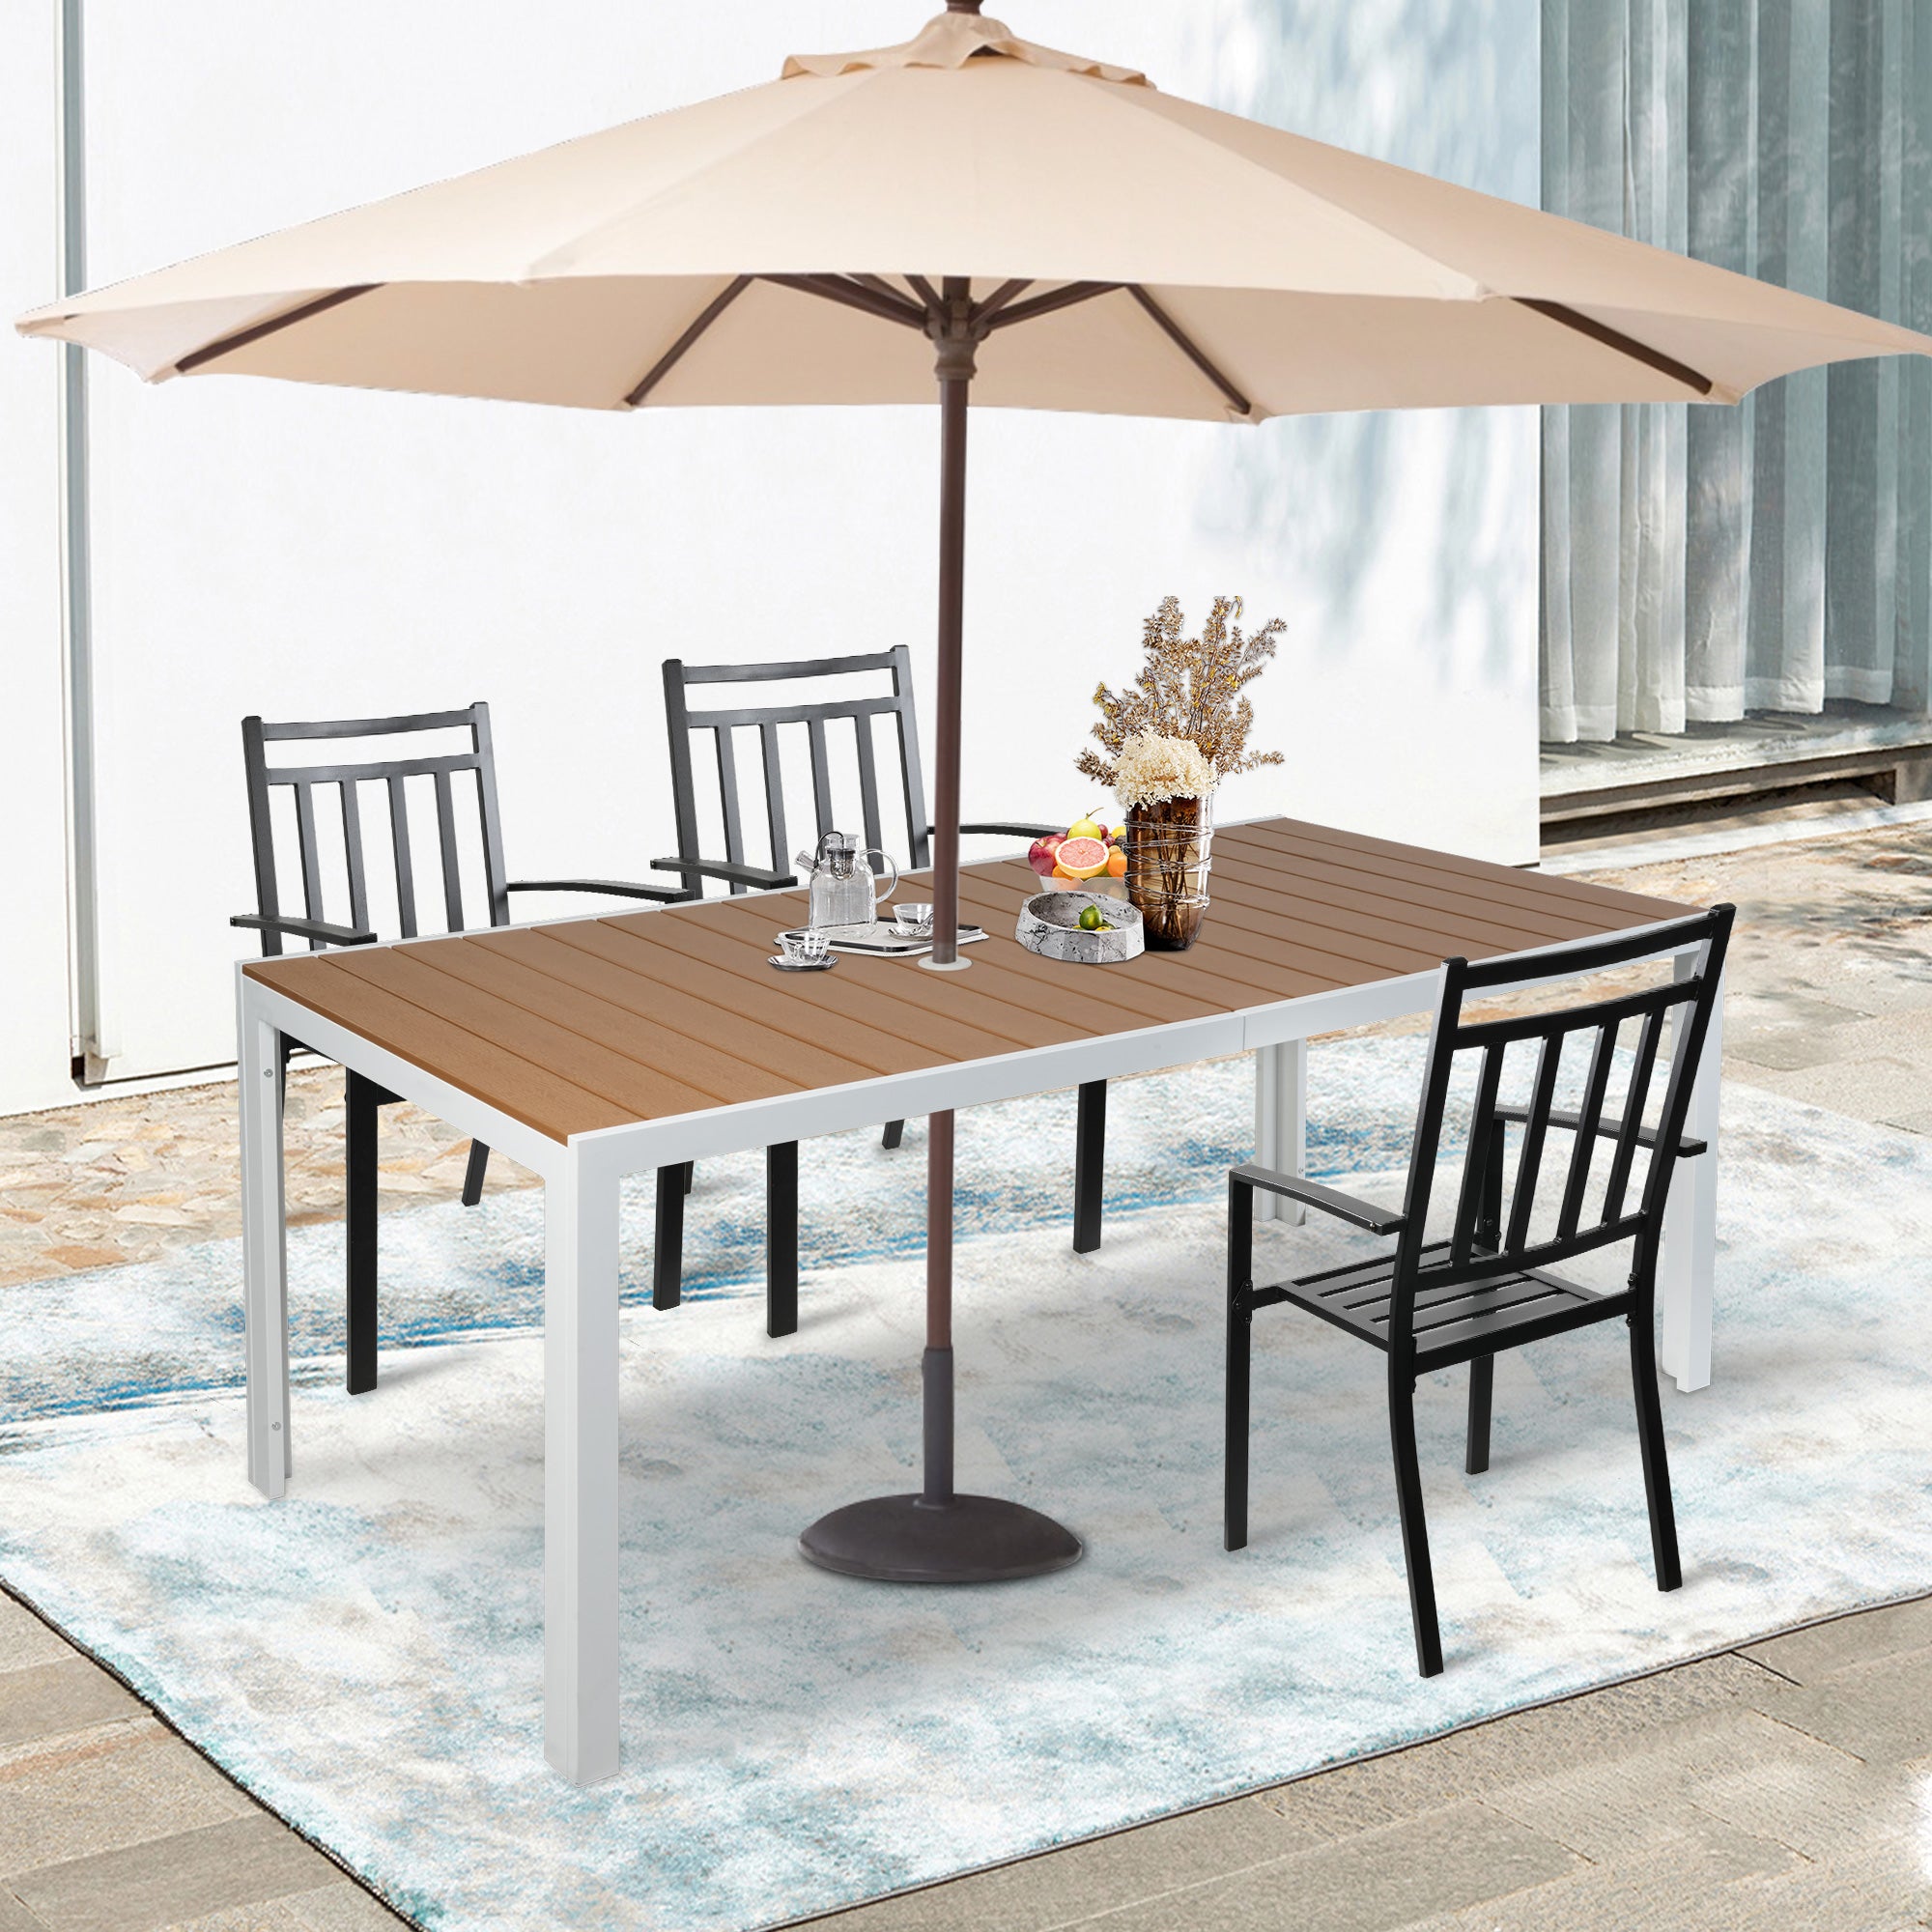 Patio Outdoor Table with Umbrella Hole for 8 Person, 71" Aluminum Frame Rectangle Table